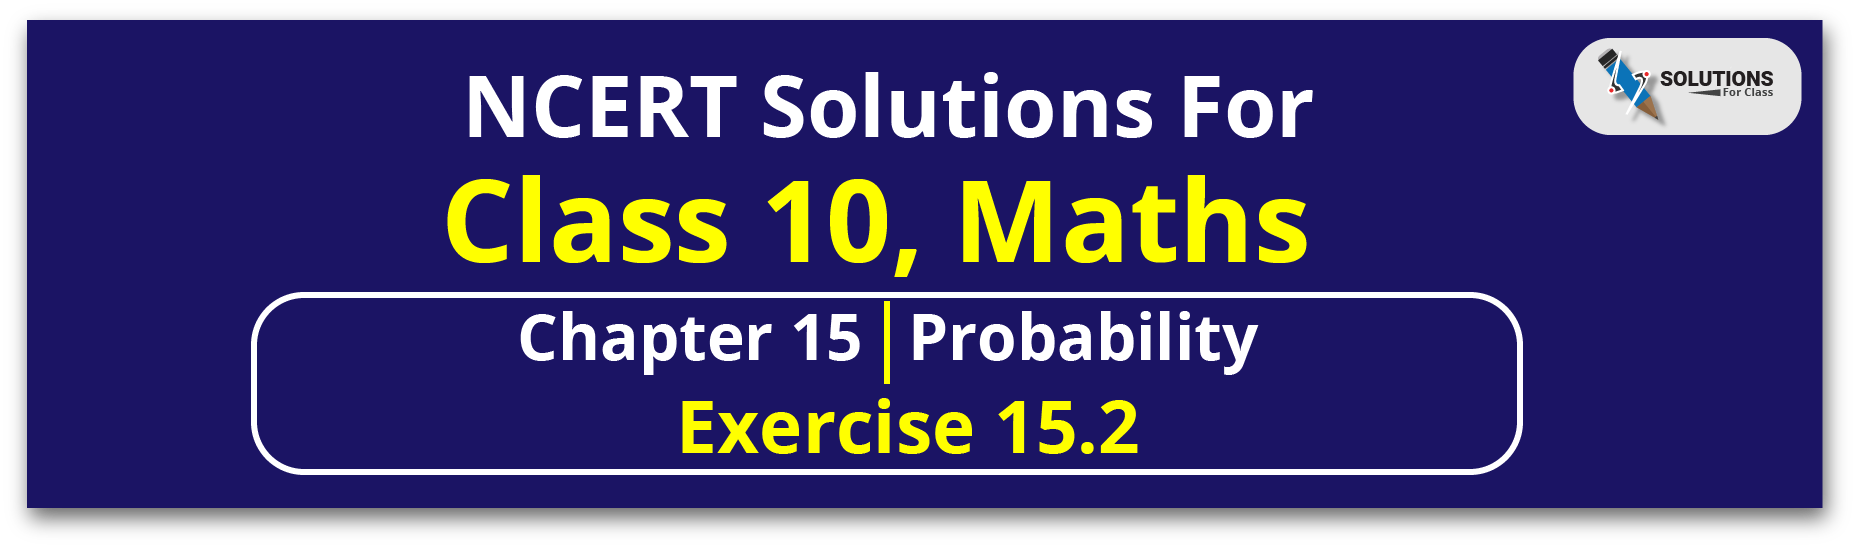 NCERT Solution For Class 10, Maths, Chapter 15, Probability, Exercise 15.2